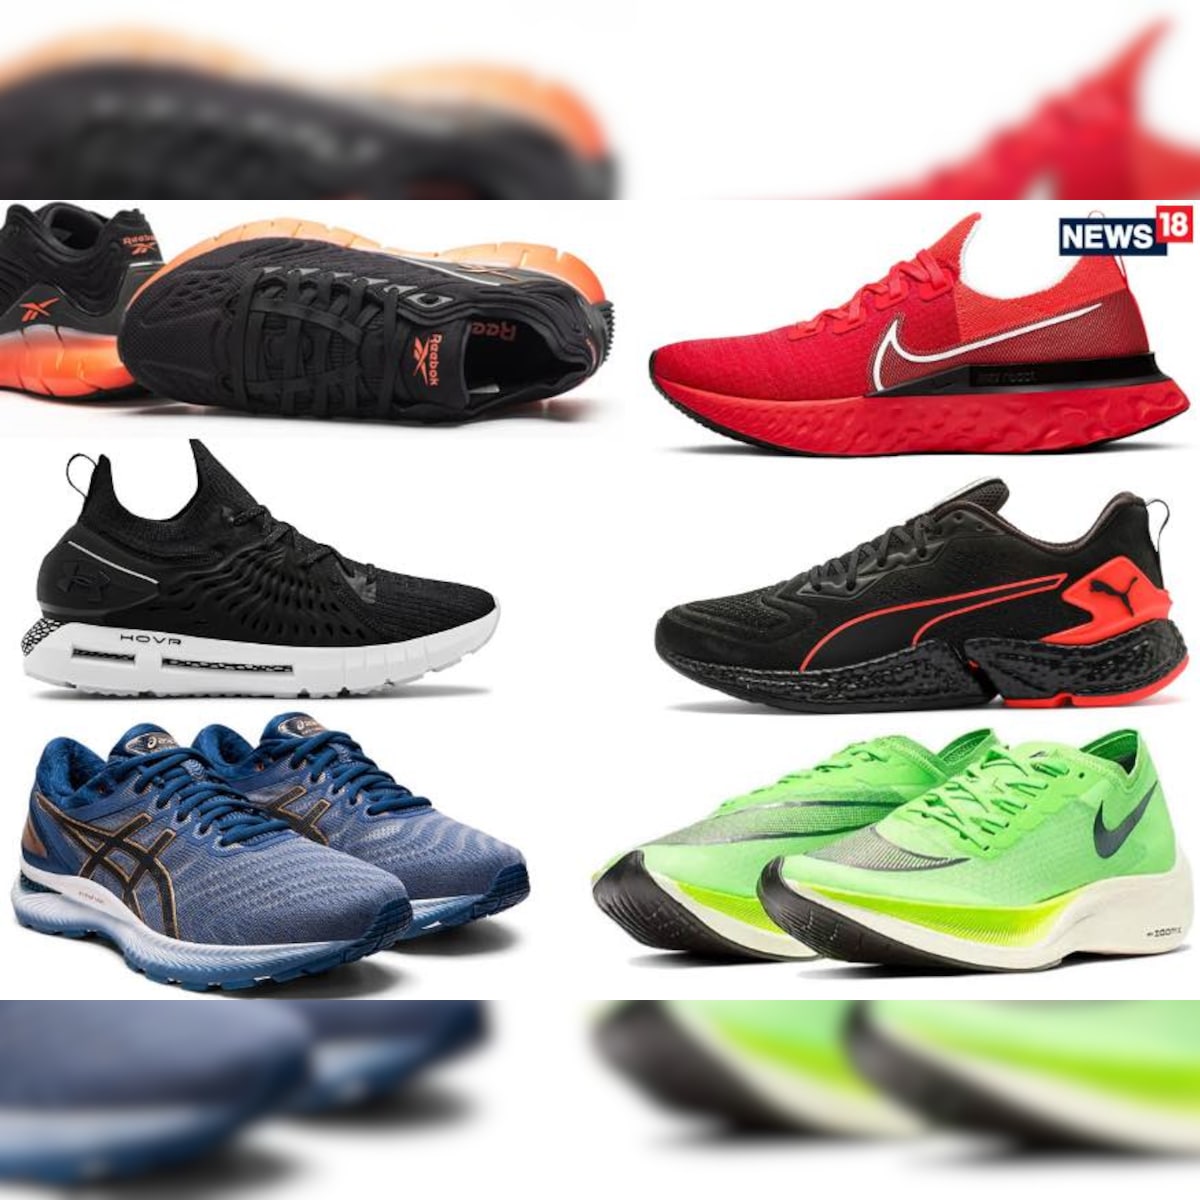 æg voldgrav diagonal Runners, Here is a Buying Guide For You: The Very Best Running Shoes of  2020 so Far